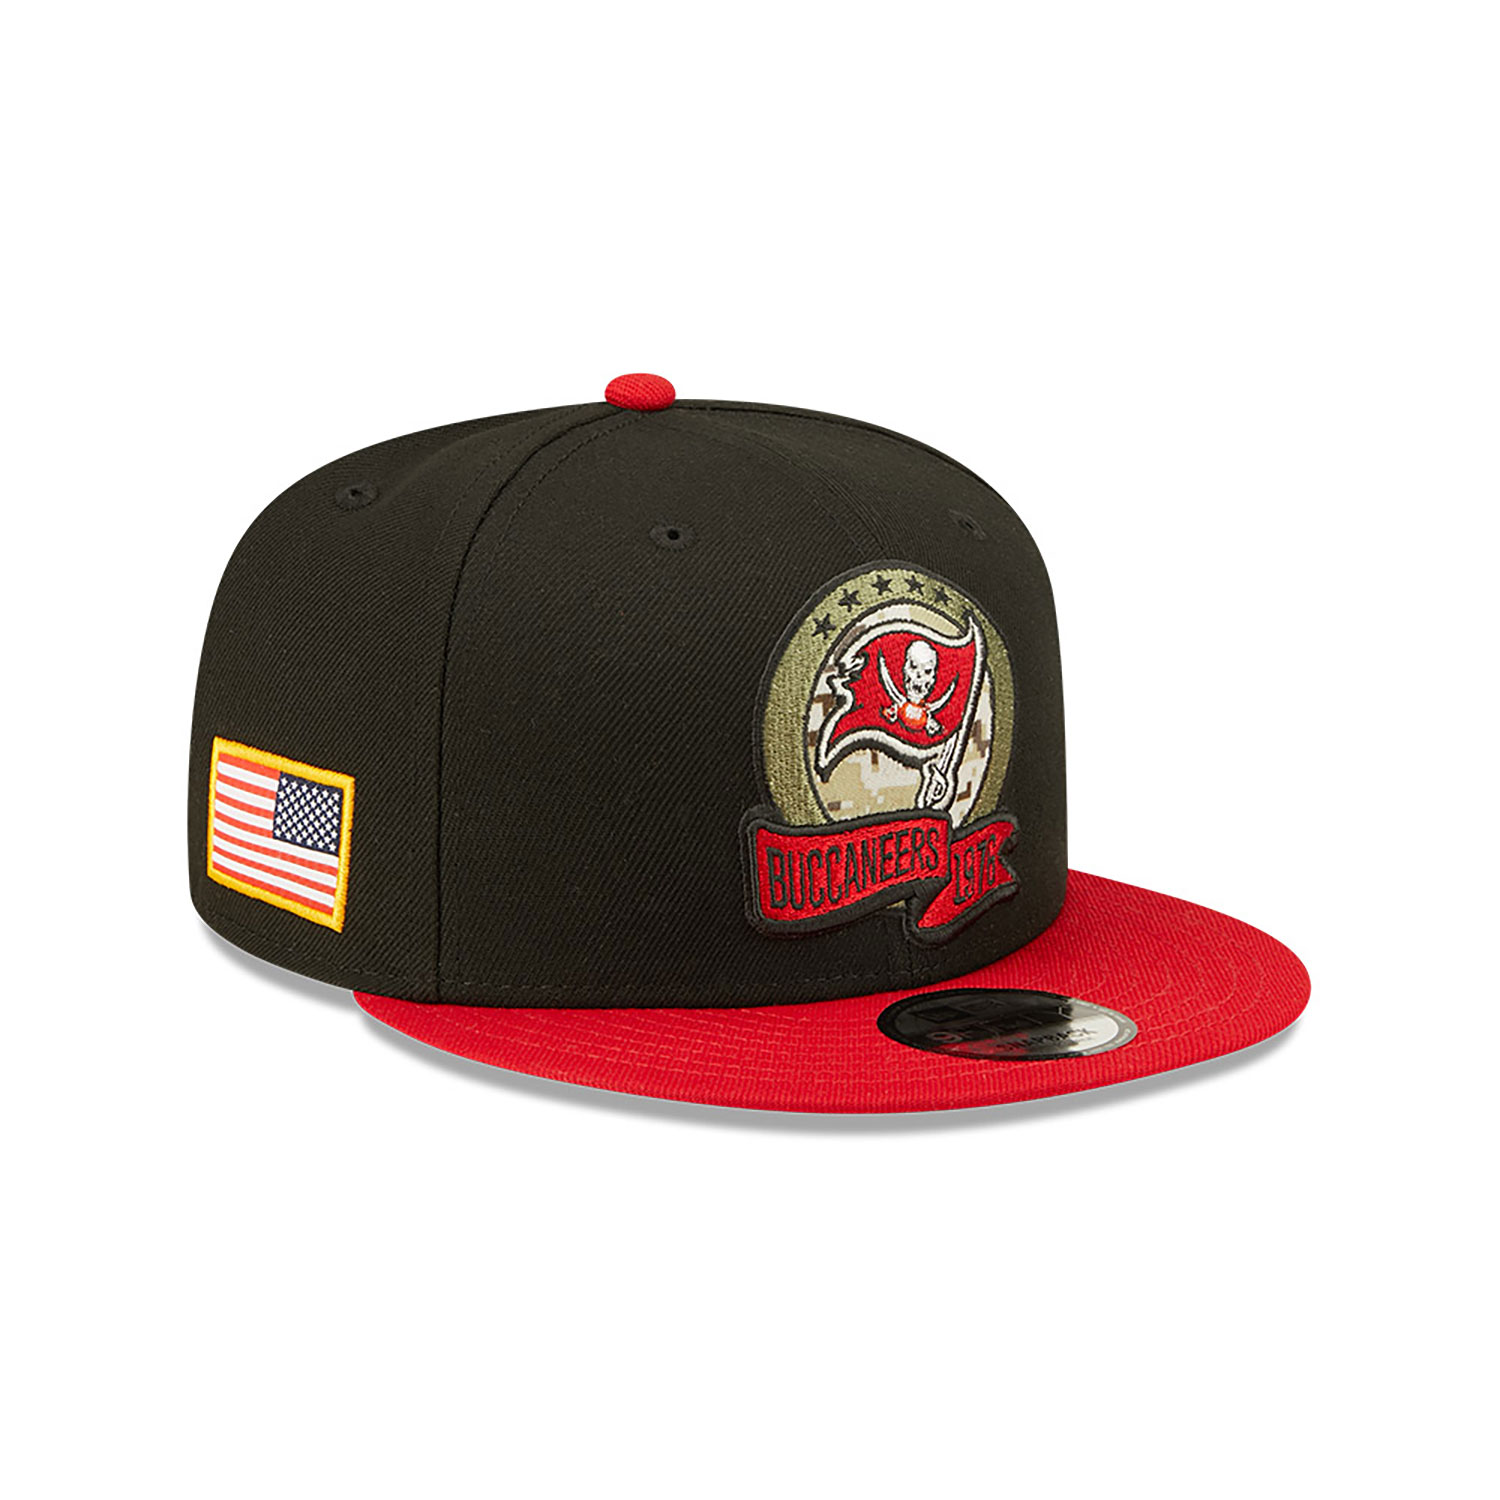 Official New Era NFL Salute To Service Tampa Bay Buccaneers Black 9FIFTY Cap  B8990_302 B8990_302 B8990_302